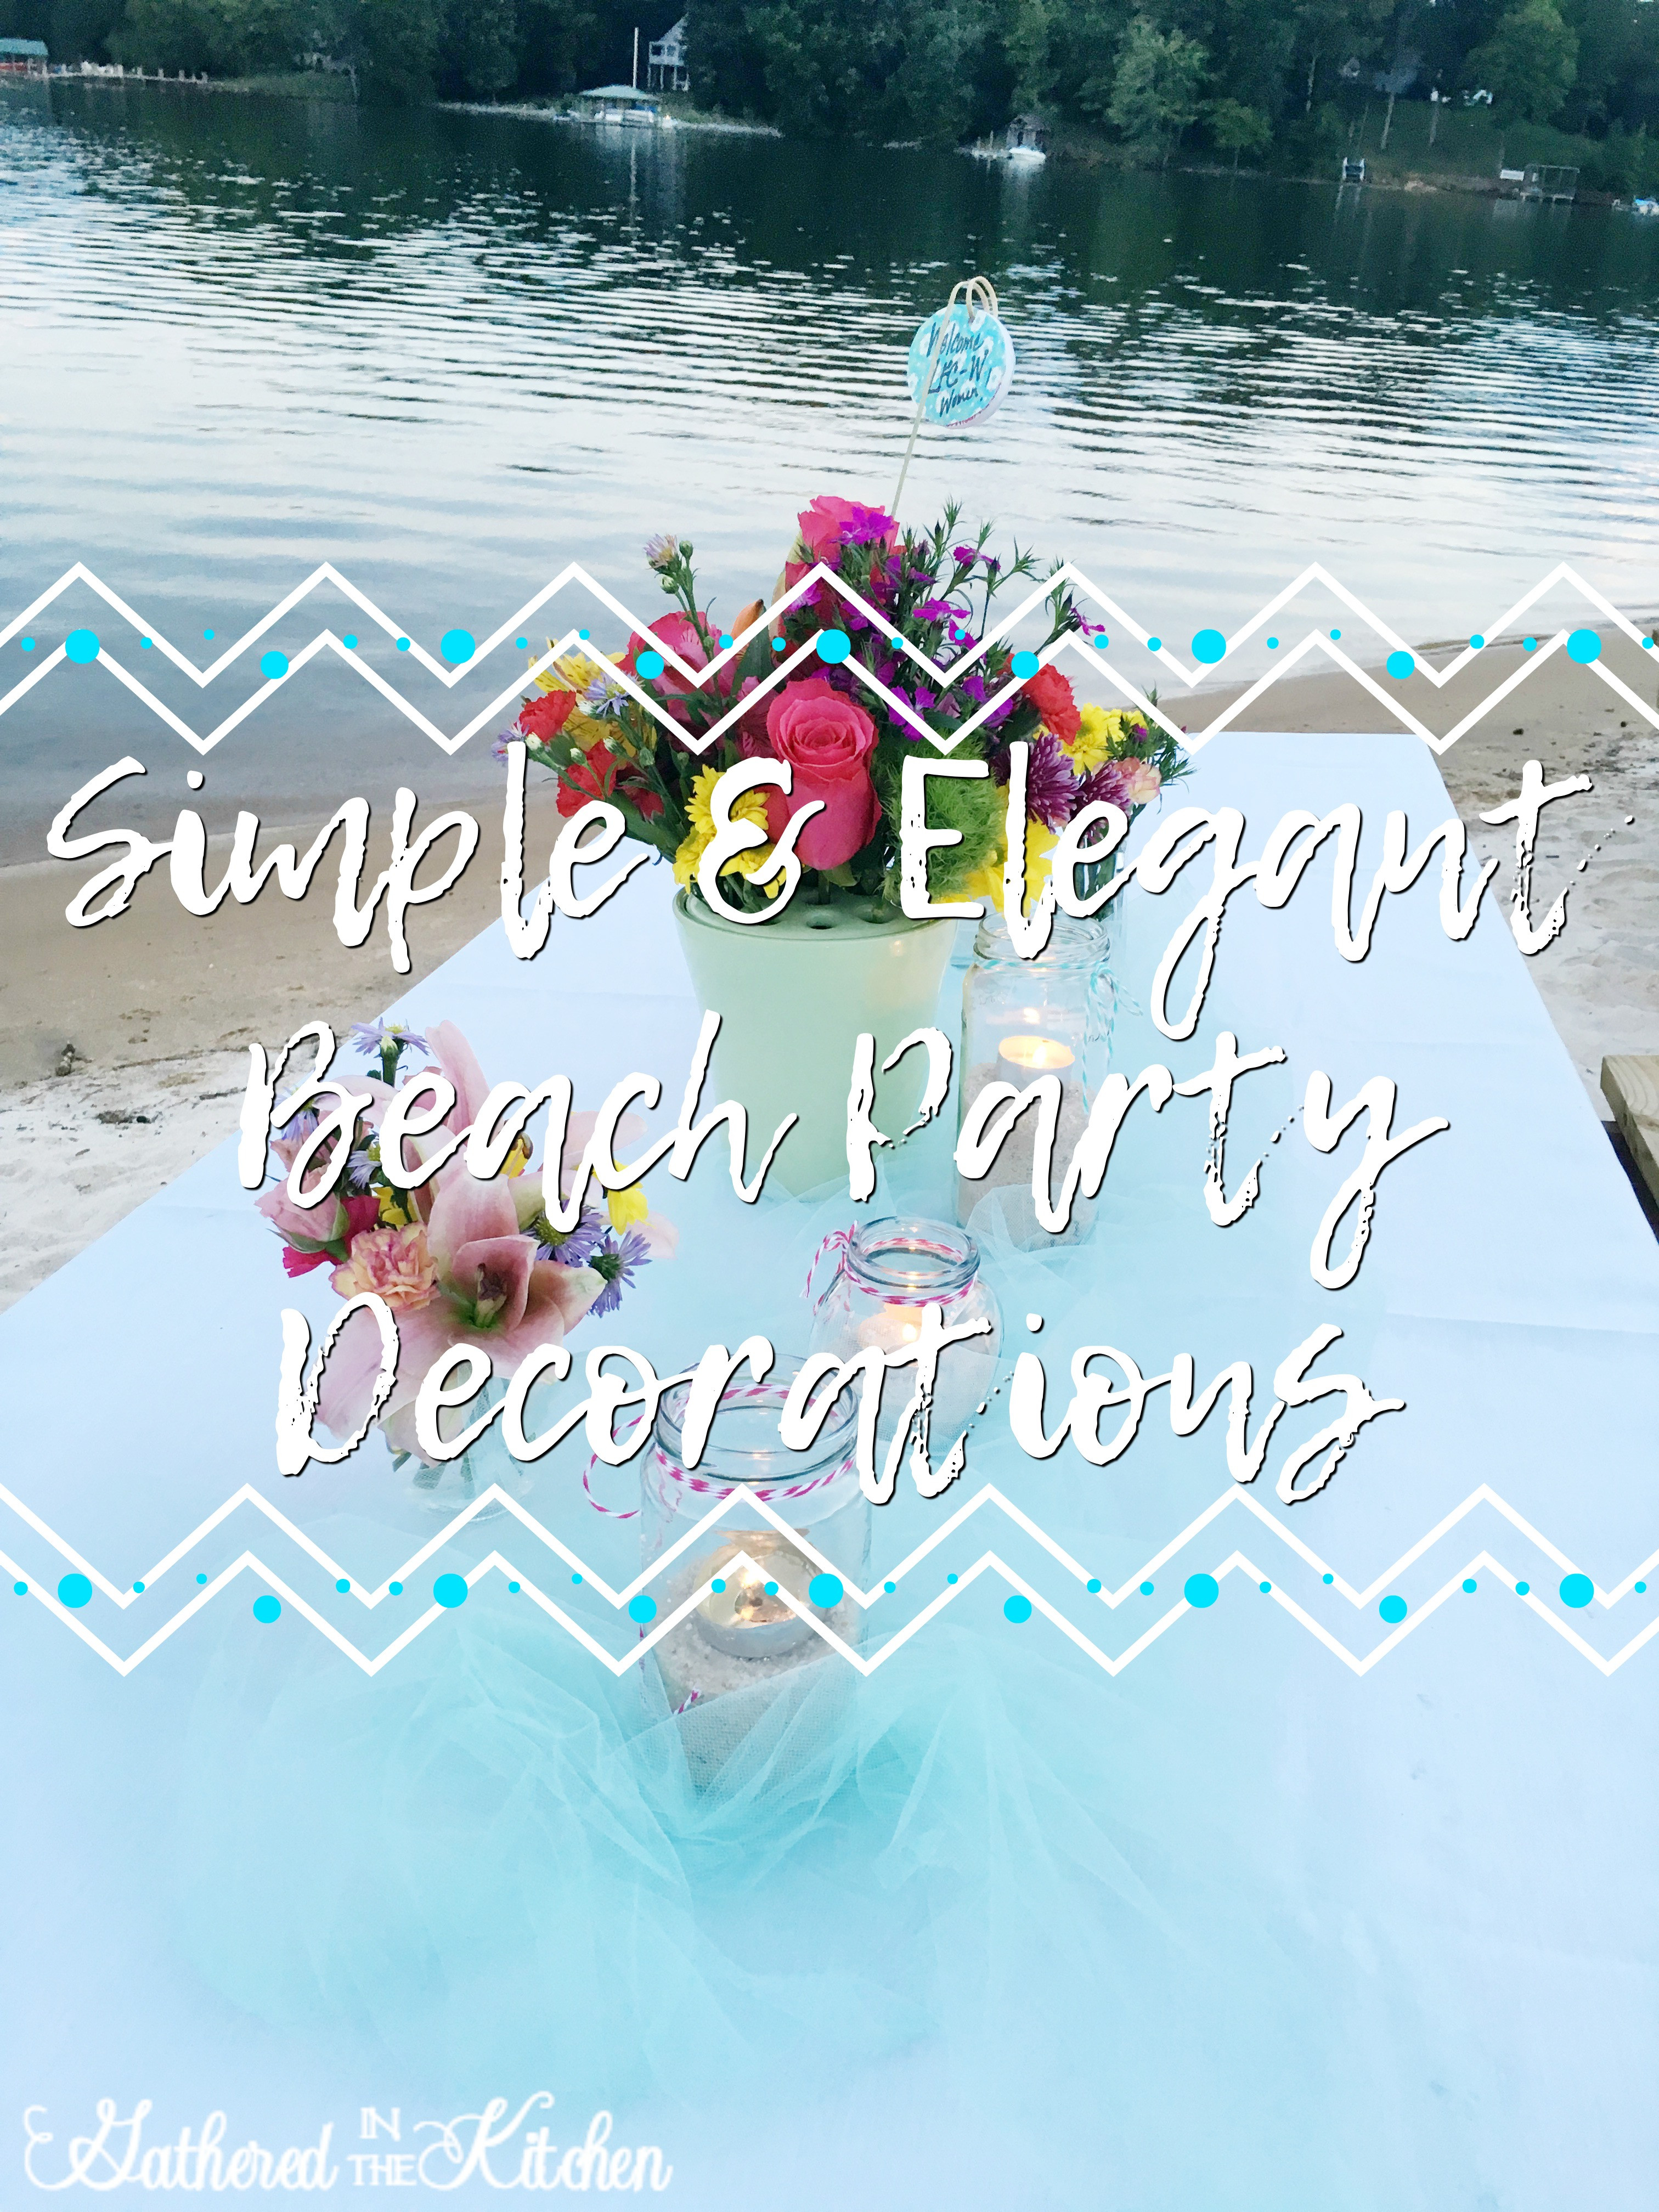 Elegant Beach Party Ideas
 Simple & Elegant Beach Party Decorations Gathered In The